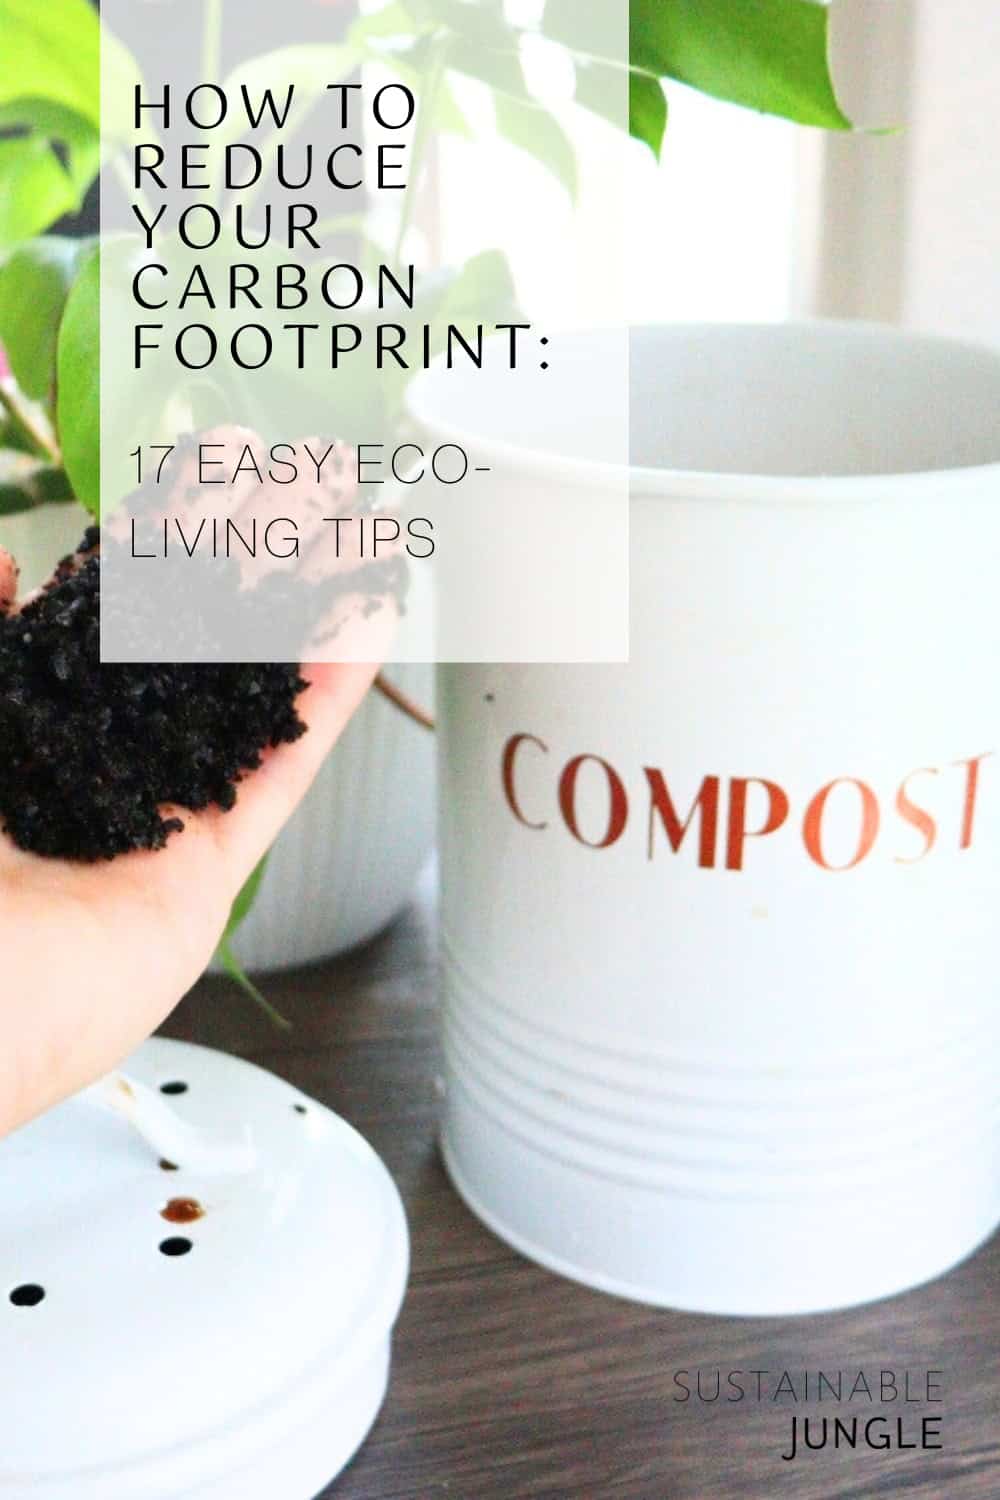 How to Reduce Your Carbon Footprint: 17 Eco-Living Tips Image by Sustainable Jungle #howtoreducecarbonfootprint #howtoreduceyourcarbonfootprint #waystoreduceyourcarbonfootprint #reducingcarbonemissions #carbonfootprintsolutions #sustainablejungle